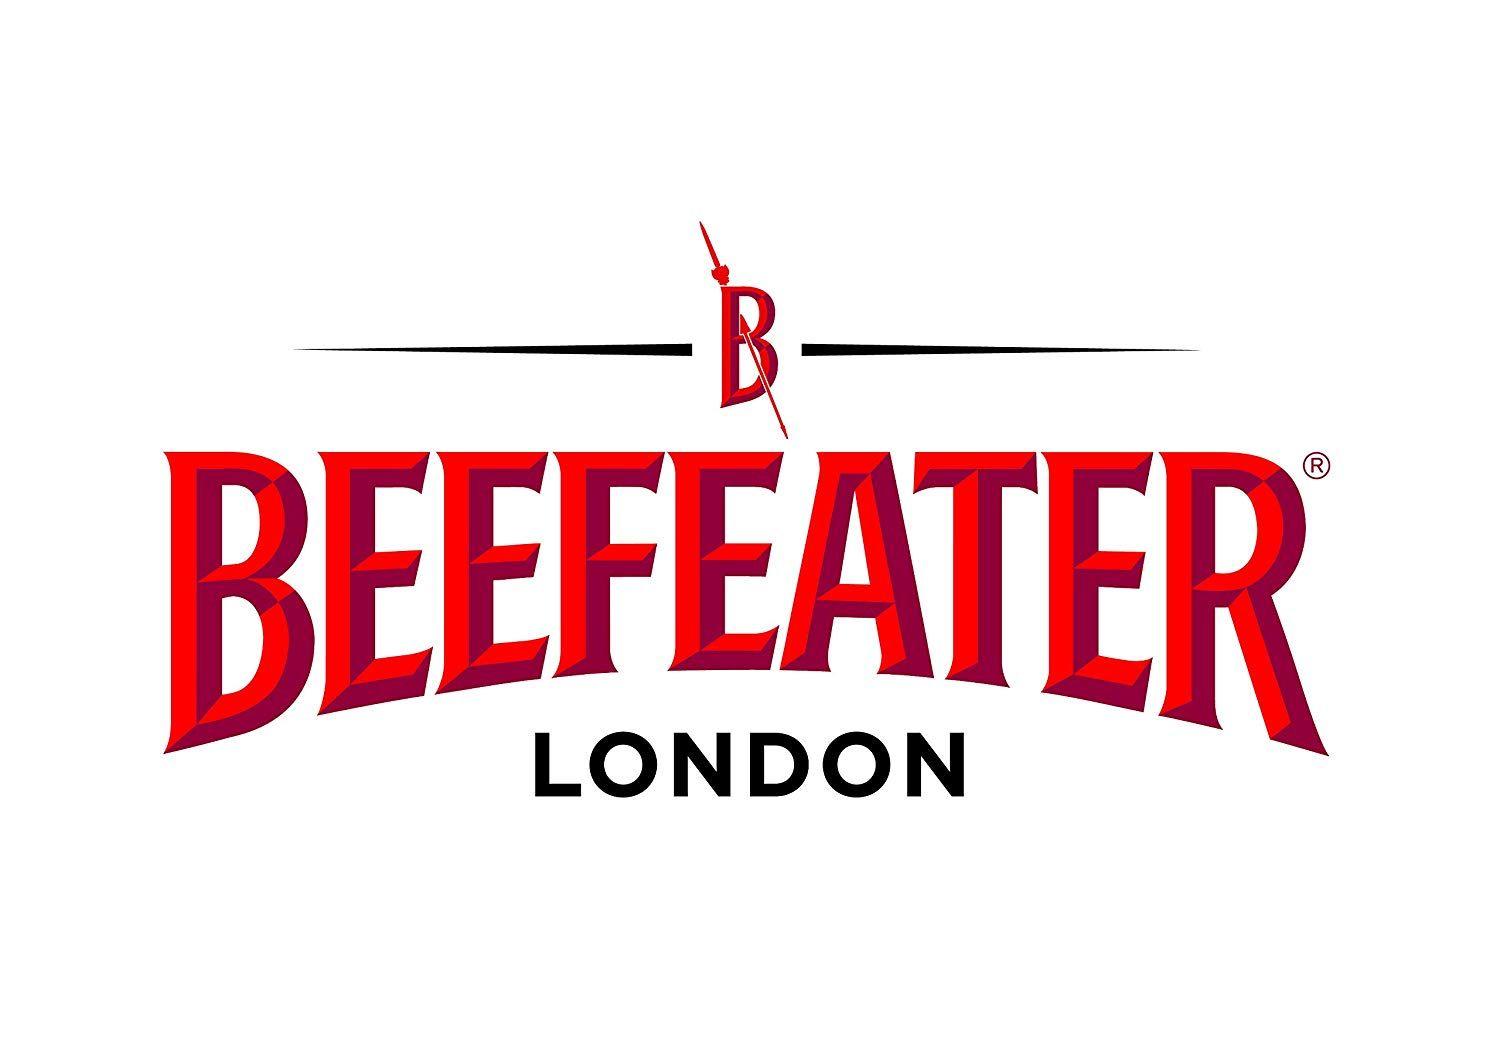 Beefeater Logo - BEEFEATER London Dry Gin Magnum 1.5 Litre Bottle: Amazon.co.uk: Grocery